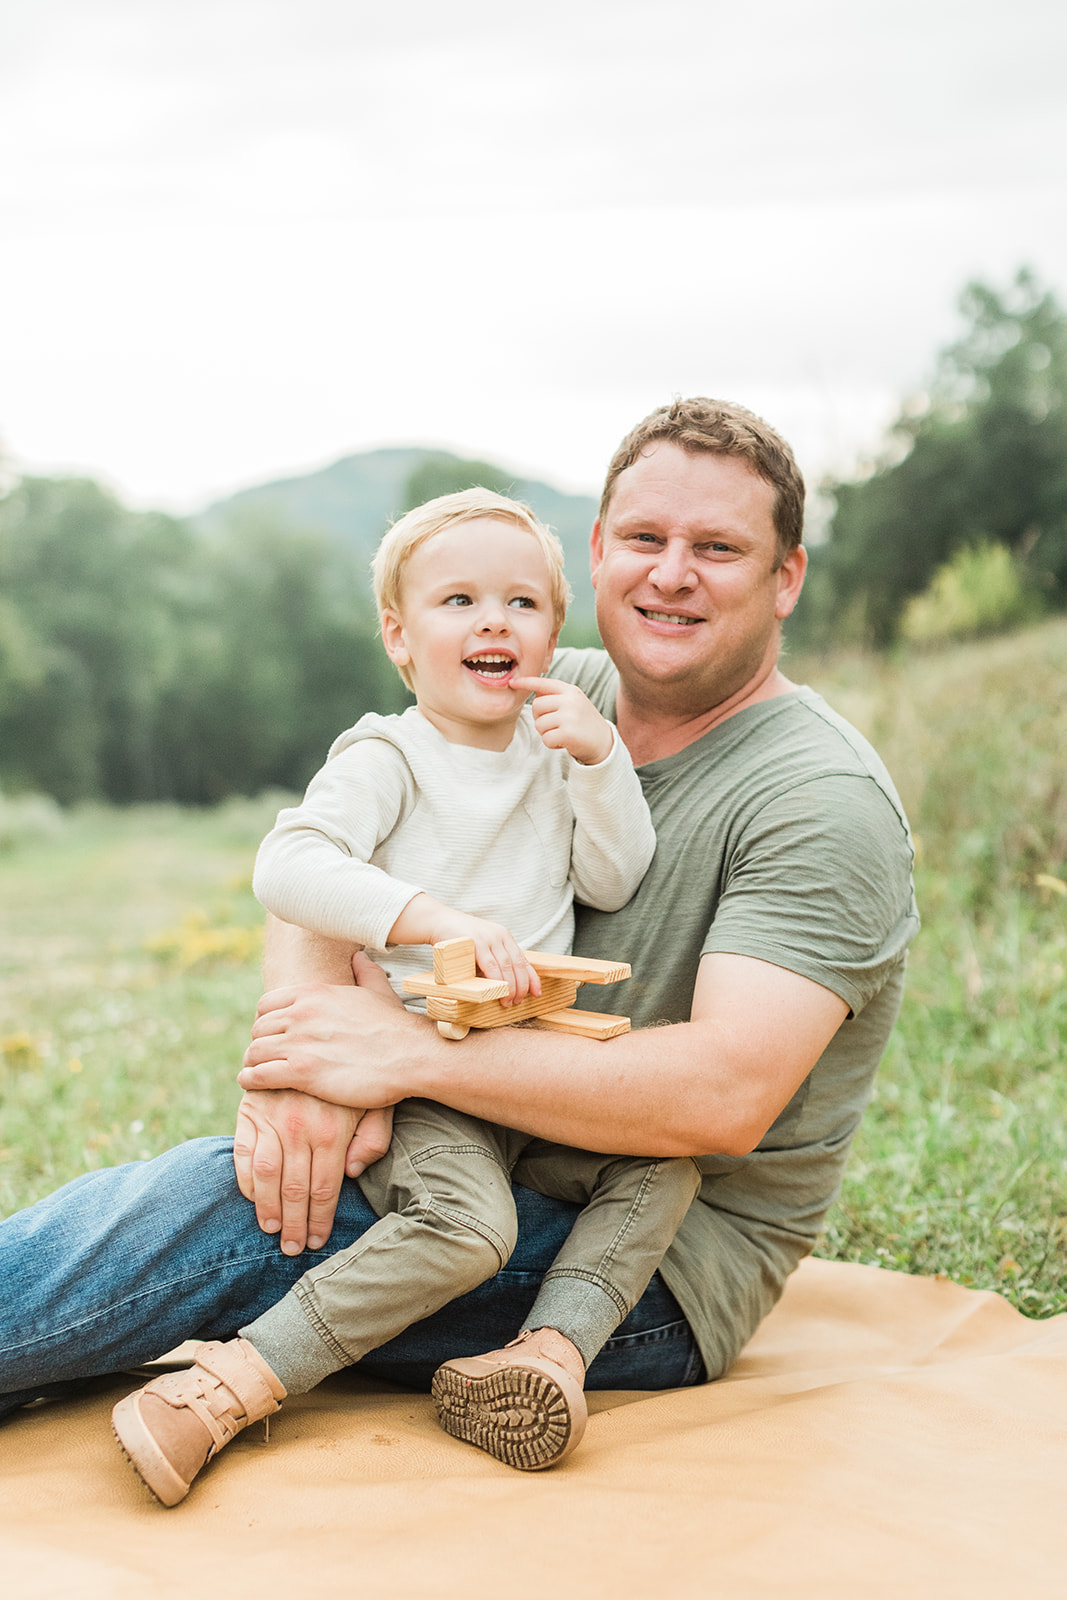 outdoor family session in nashville tennessee. dad and little boy